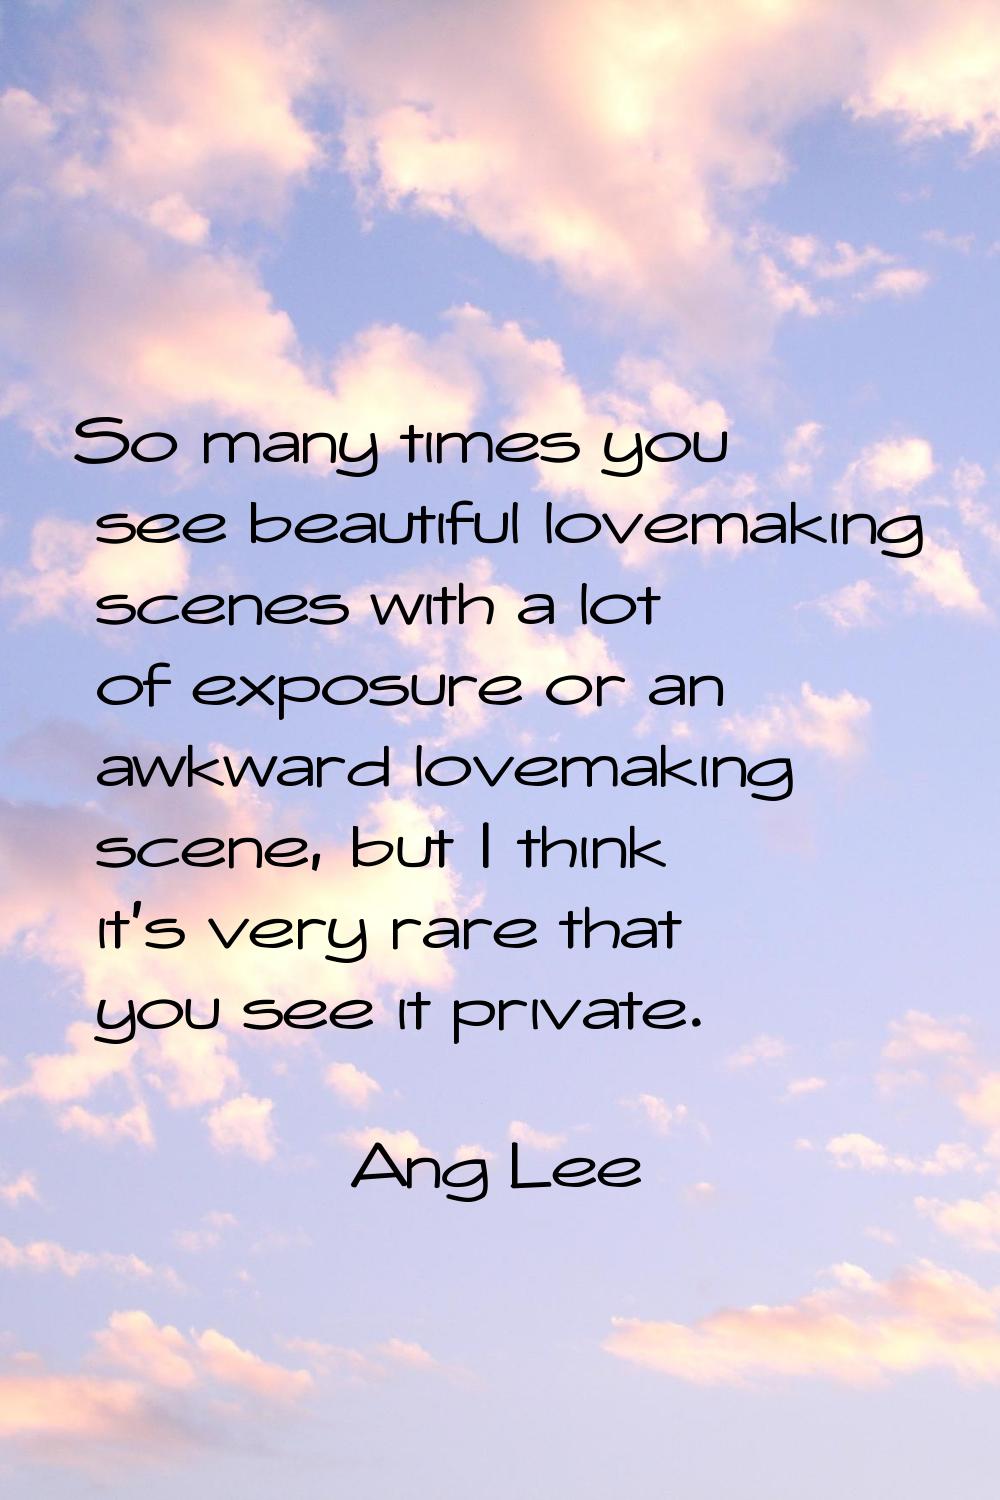 So many times you see beautiful lovemaking scenes with a lot of exposure or an awkward lovemaking s